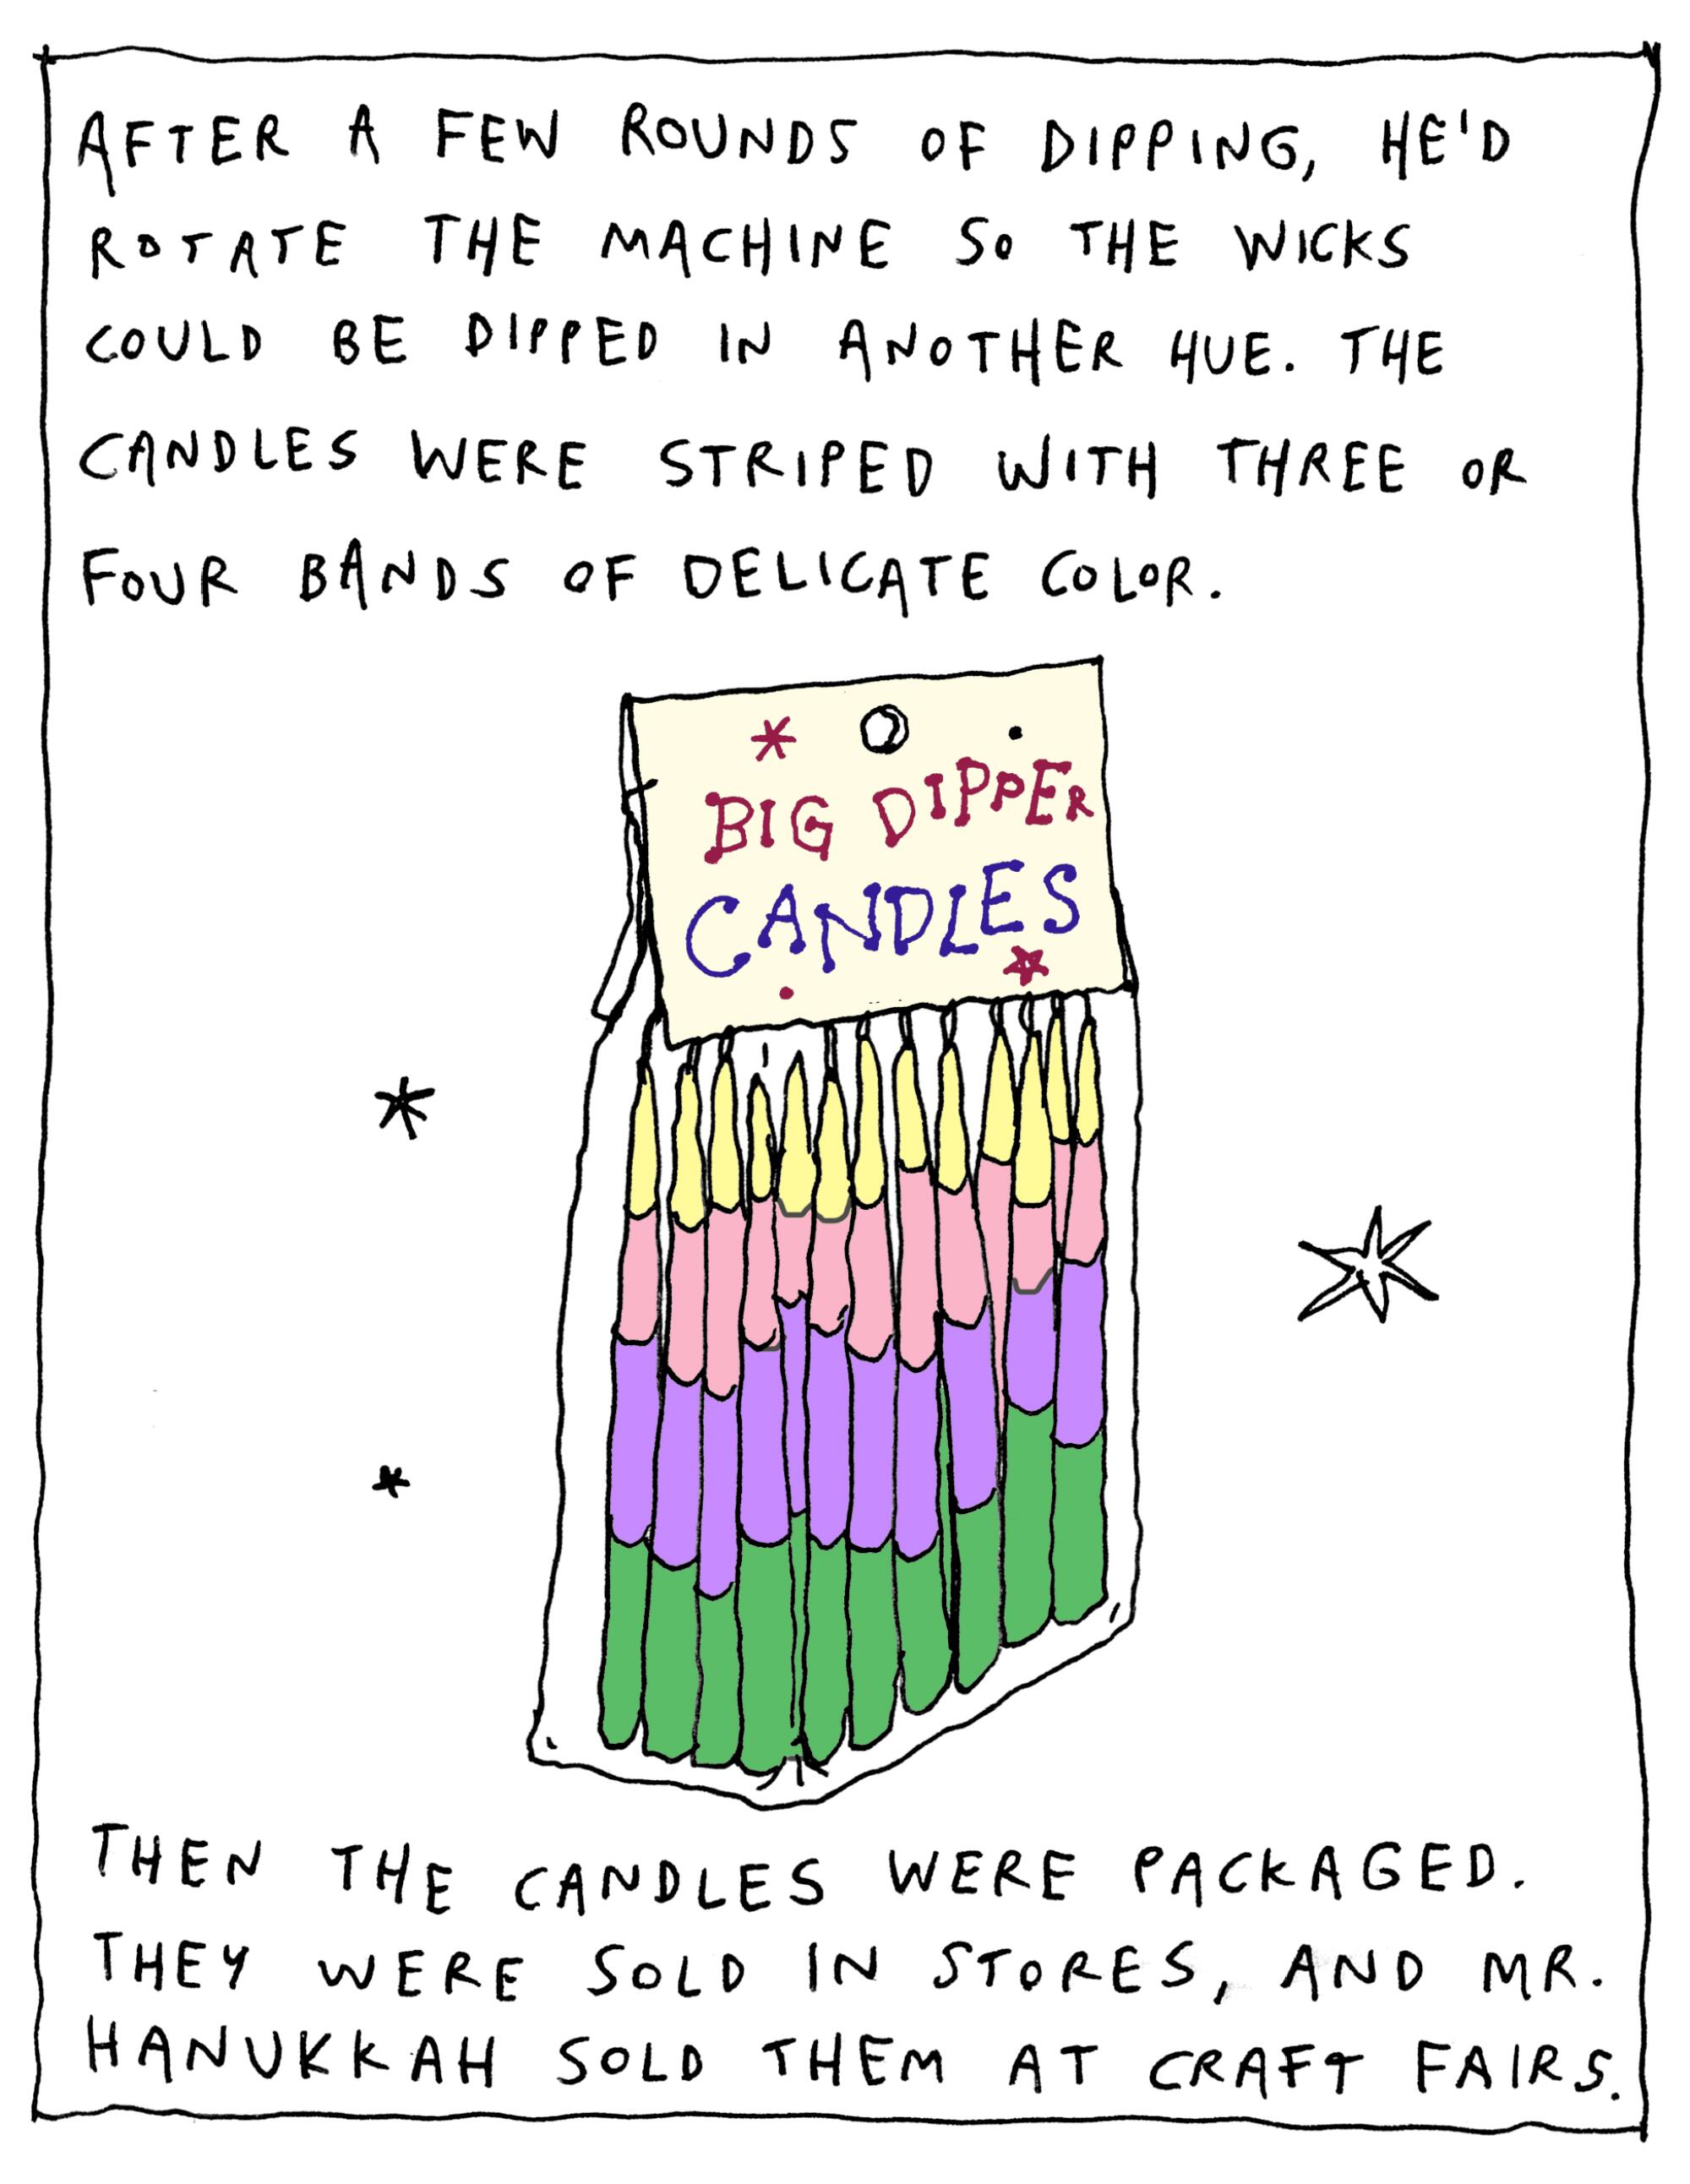 Comic illustration of a bag of multicolored "big dipper candles" in green, purple, pink and yellow.